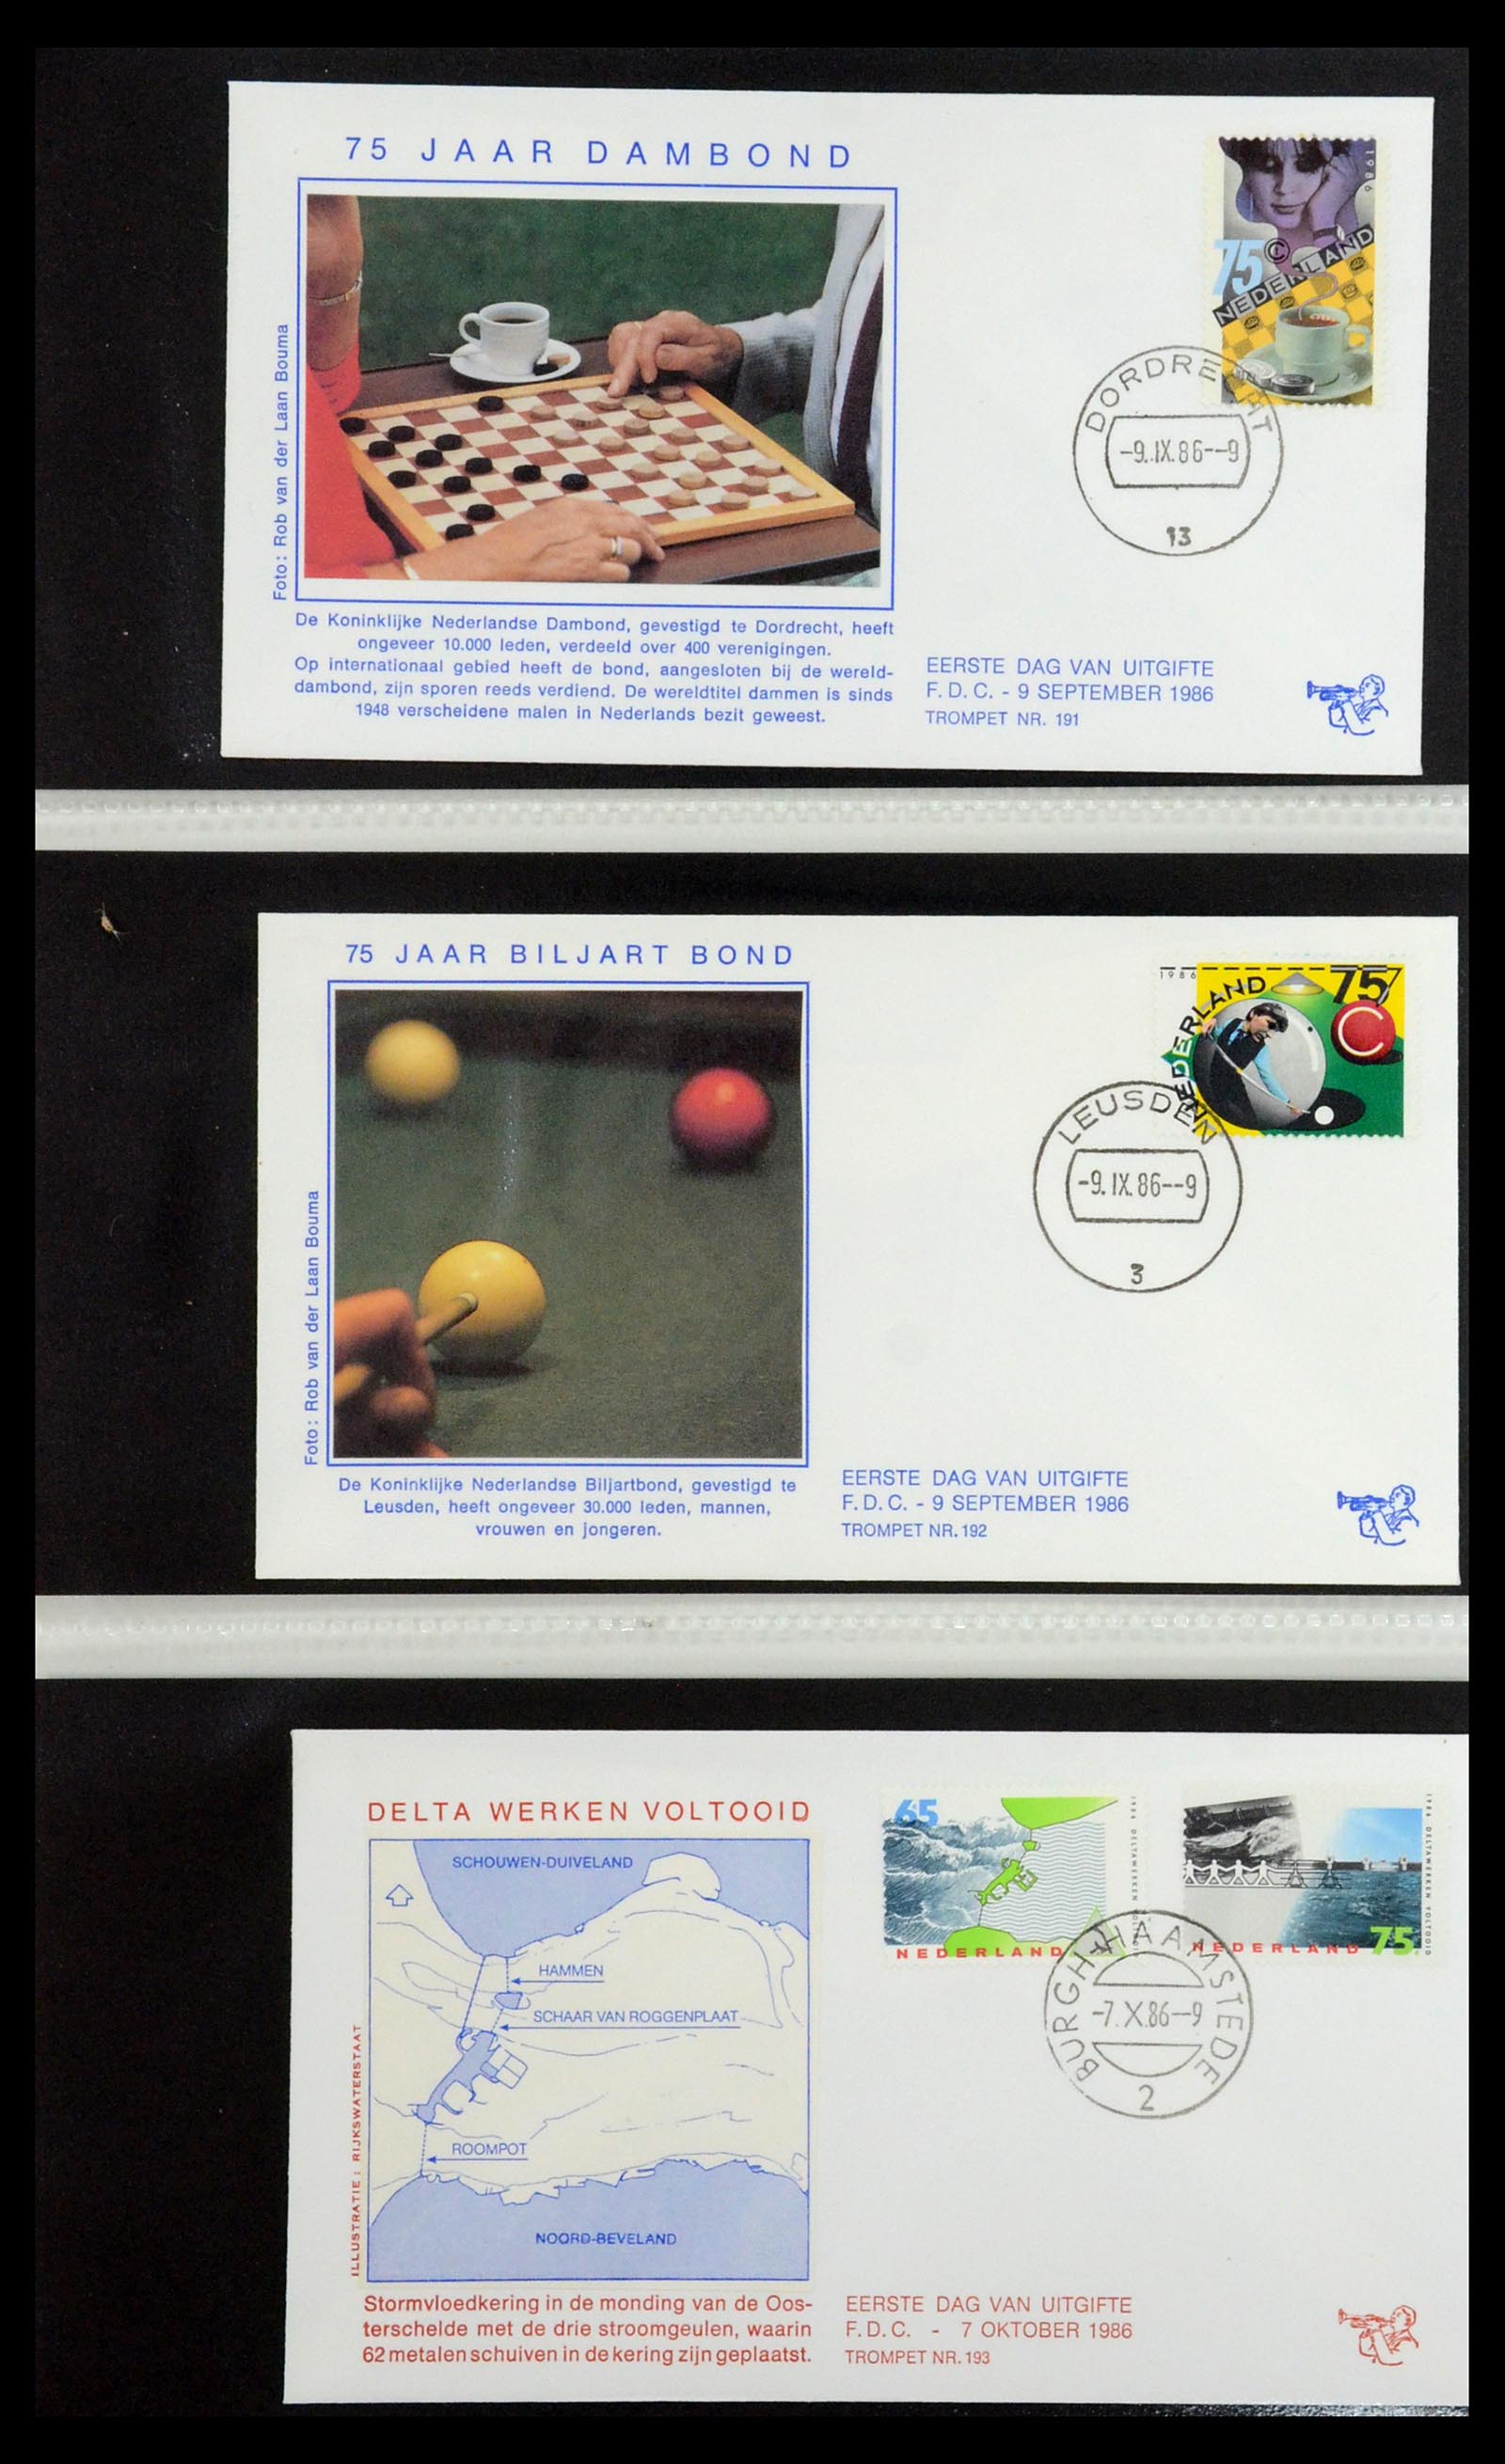 36342 073 - Stamp collection 36342 Netherlands Tromp FDC's 1968-1987.